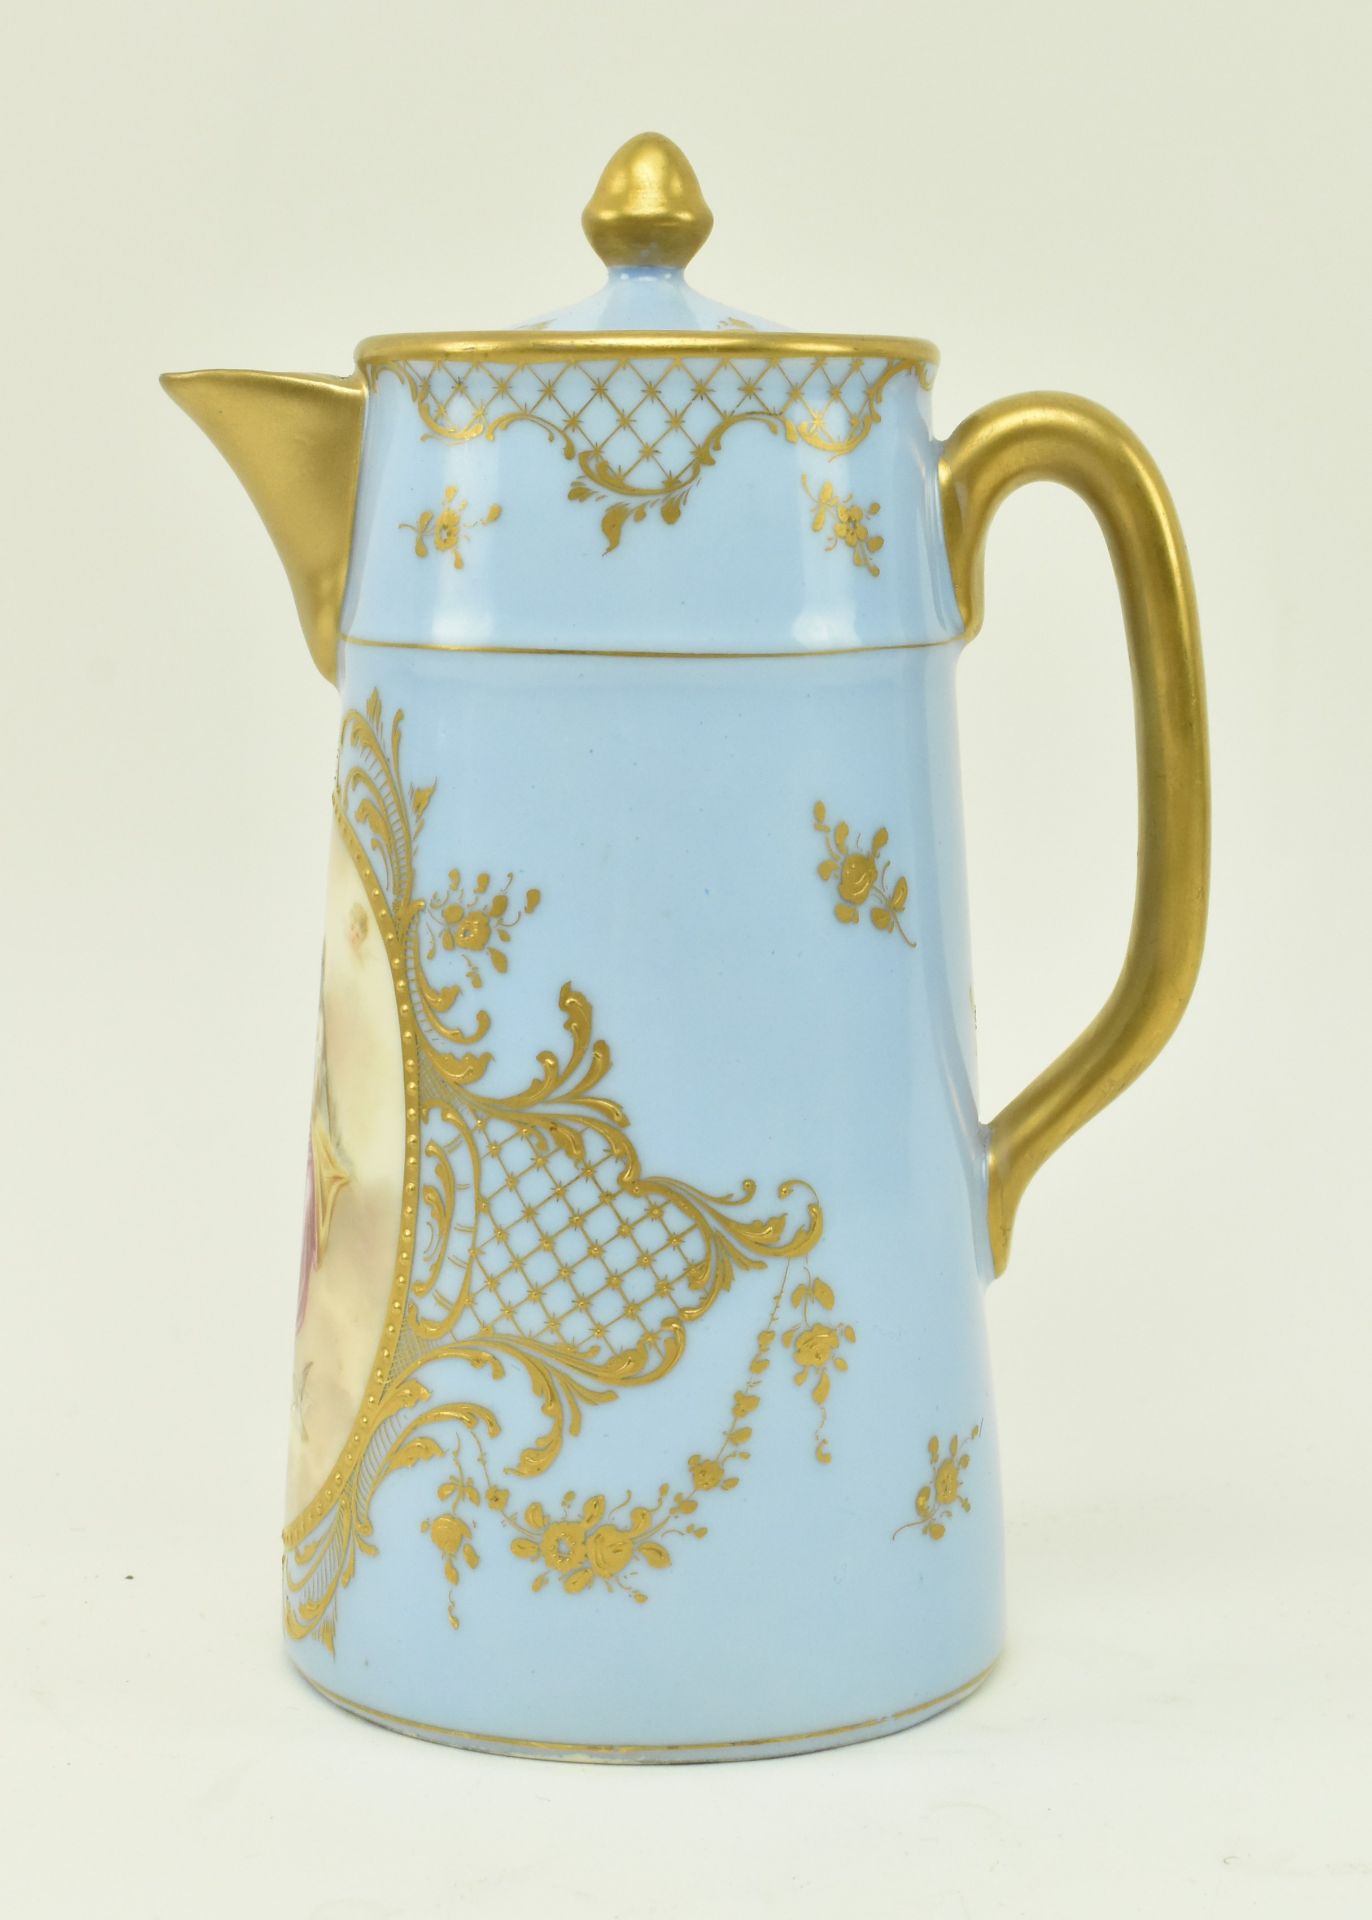 DRESDEN - EARLY 20TH CENTURY PORCELAIN CHOCOLATE POT - Image 2 of 9